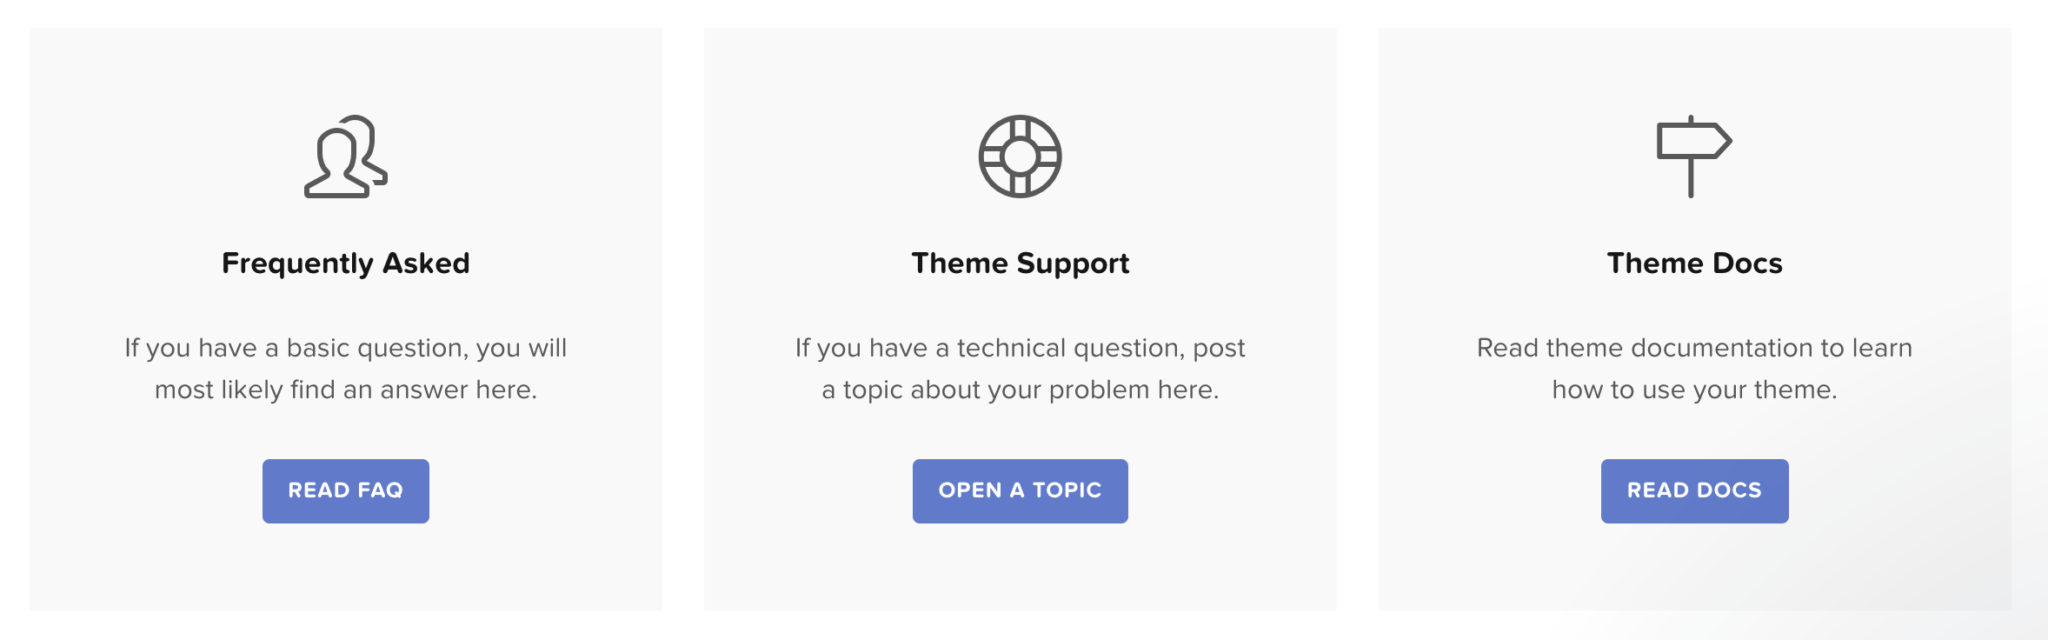 HB themes wordpress theme support page